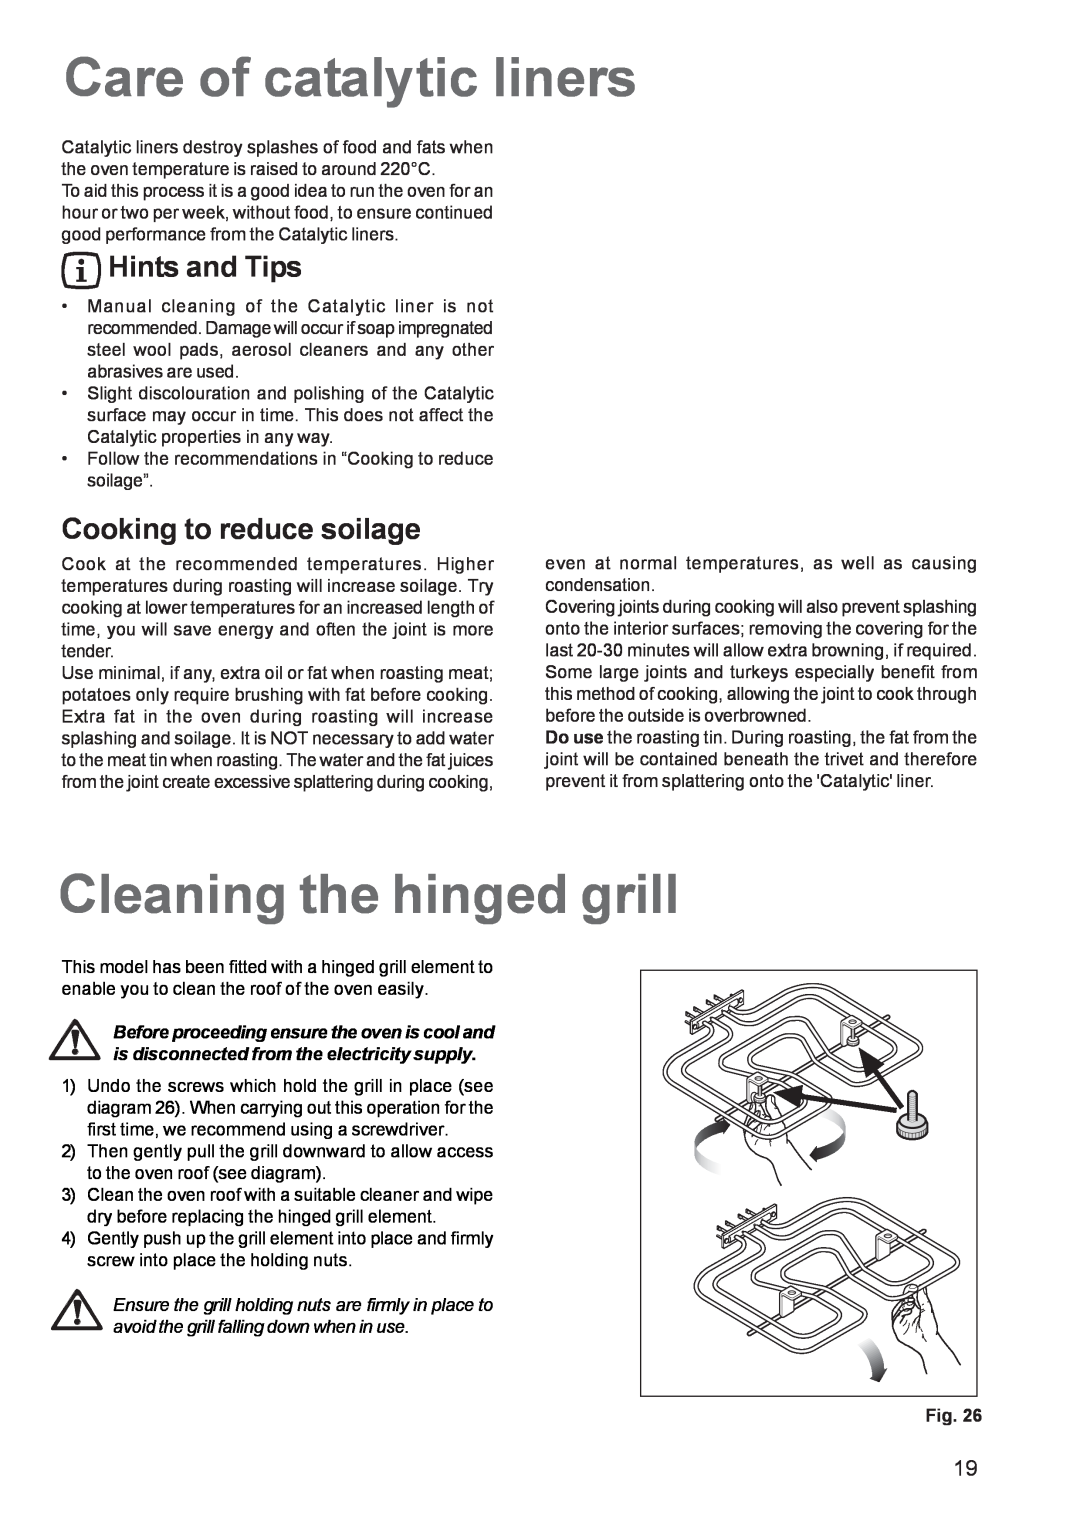 Zanussi ZOB 1060 manual Care of catalytic liners, Cleaning the hinged grill, Cooking to reduce soilage, Hints and Tips, Fig 